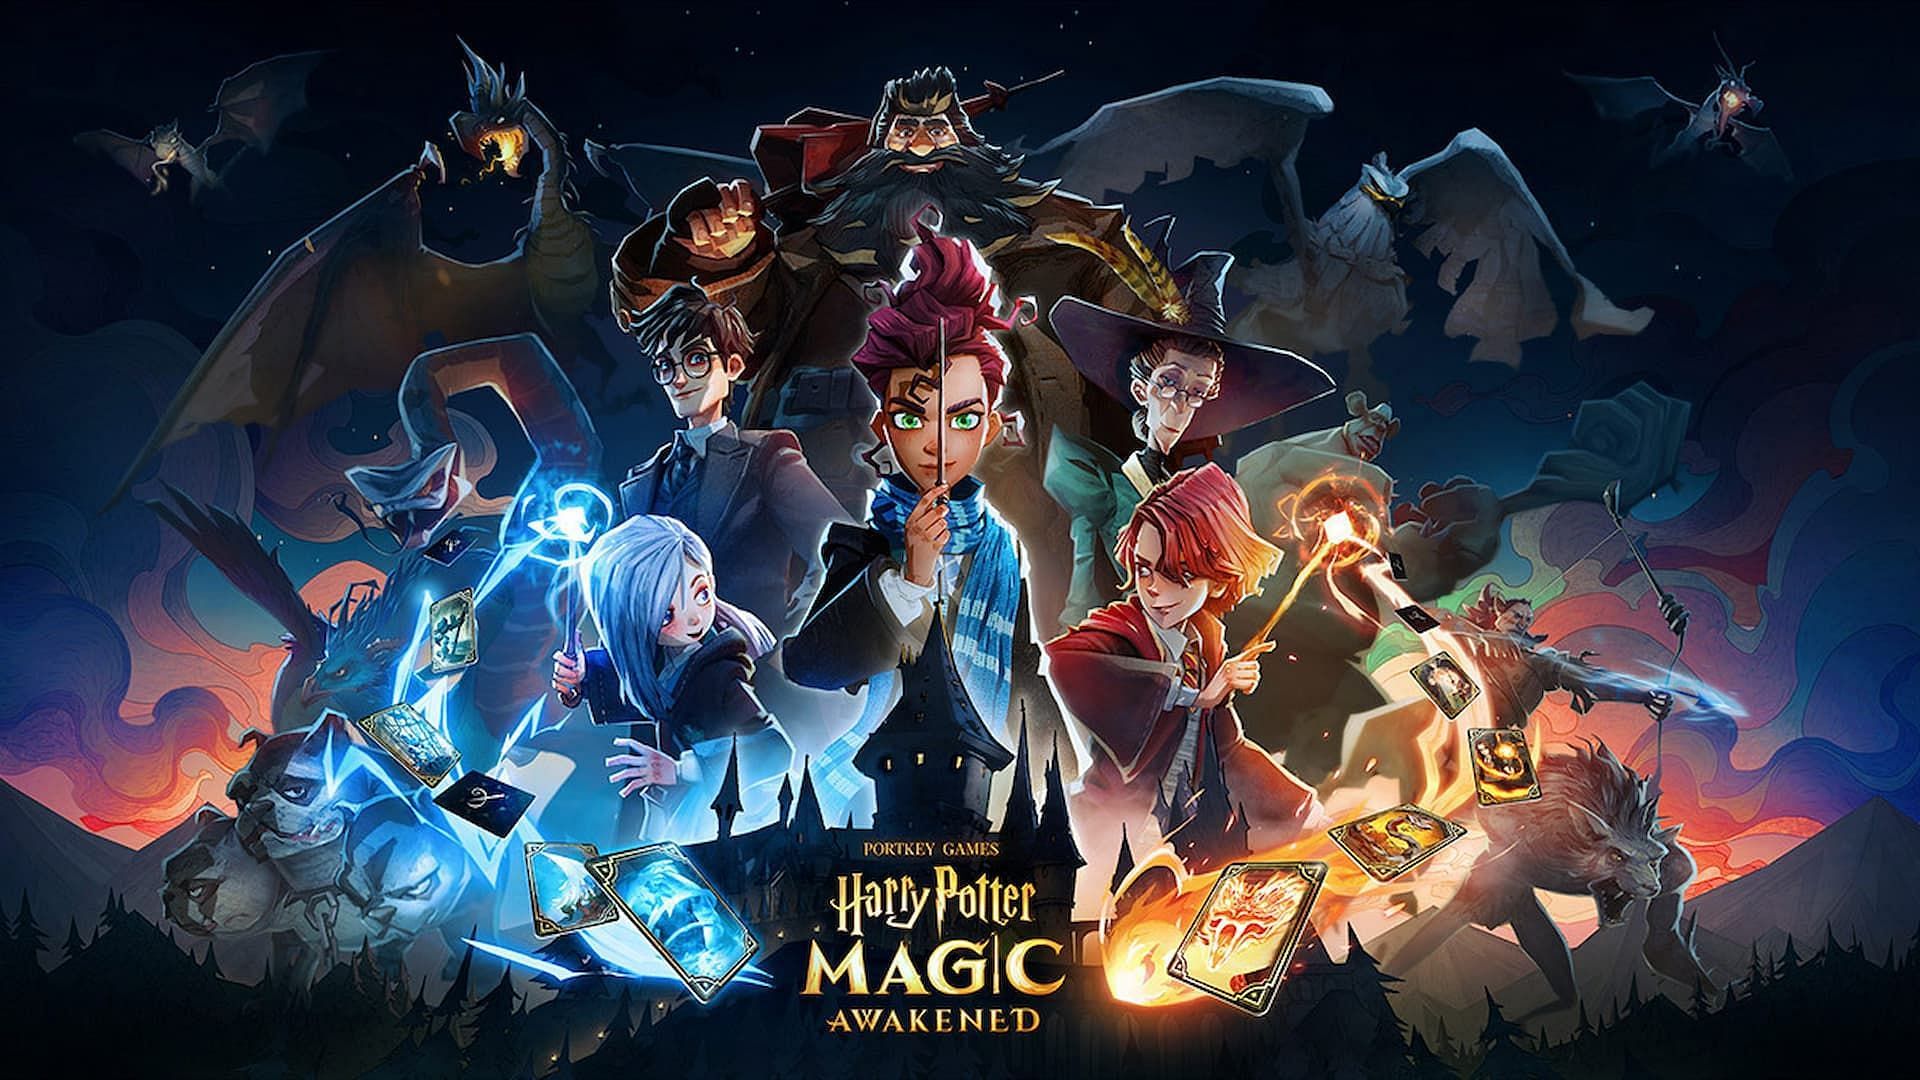 Harry Potter Magic Awakened is now available worldwide on Android, iOS, and PC (Image via WB Games)